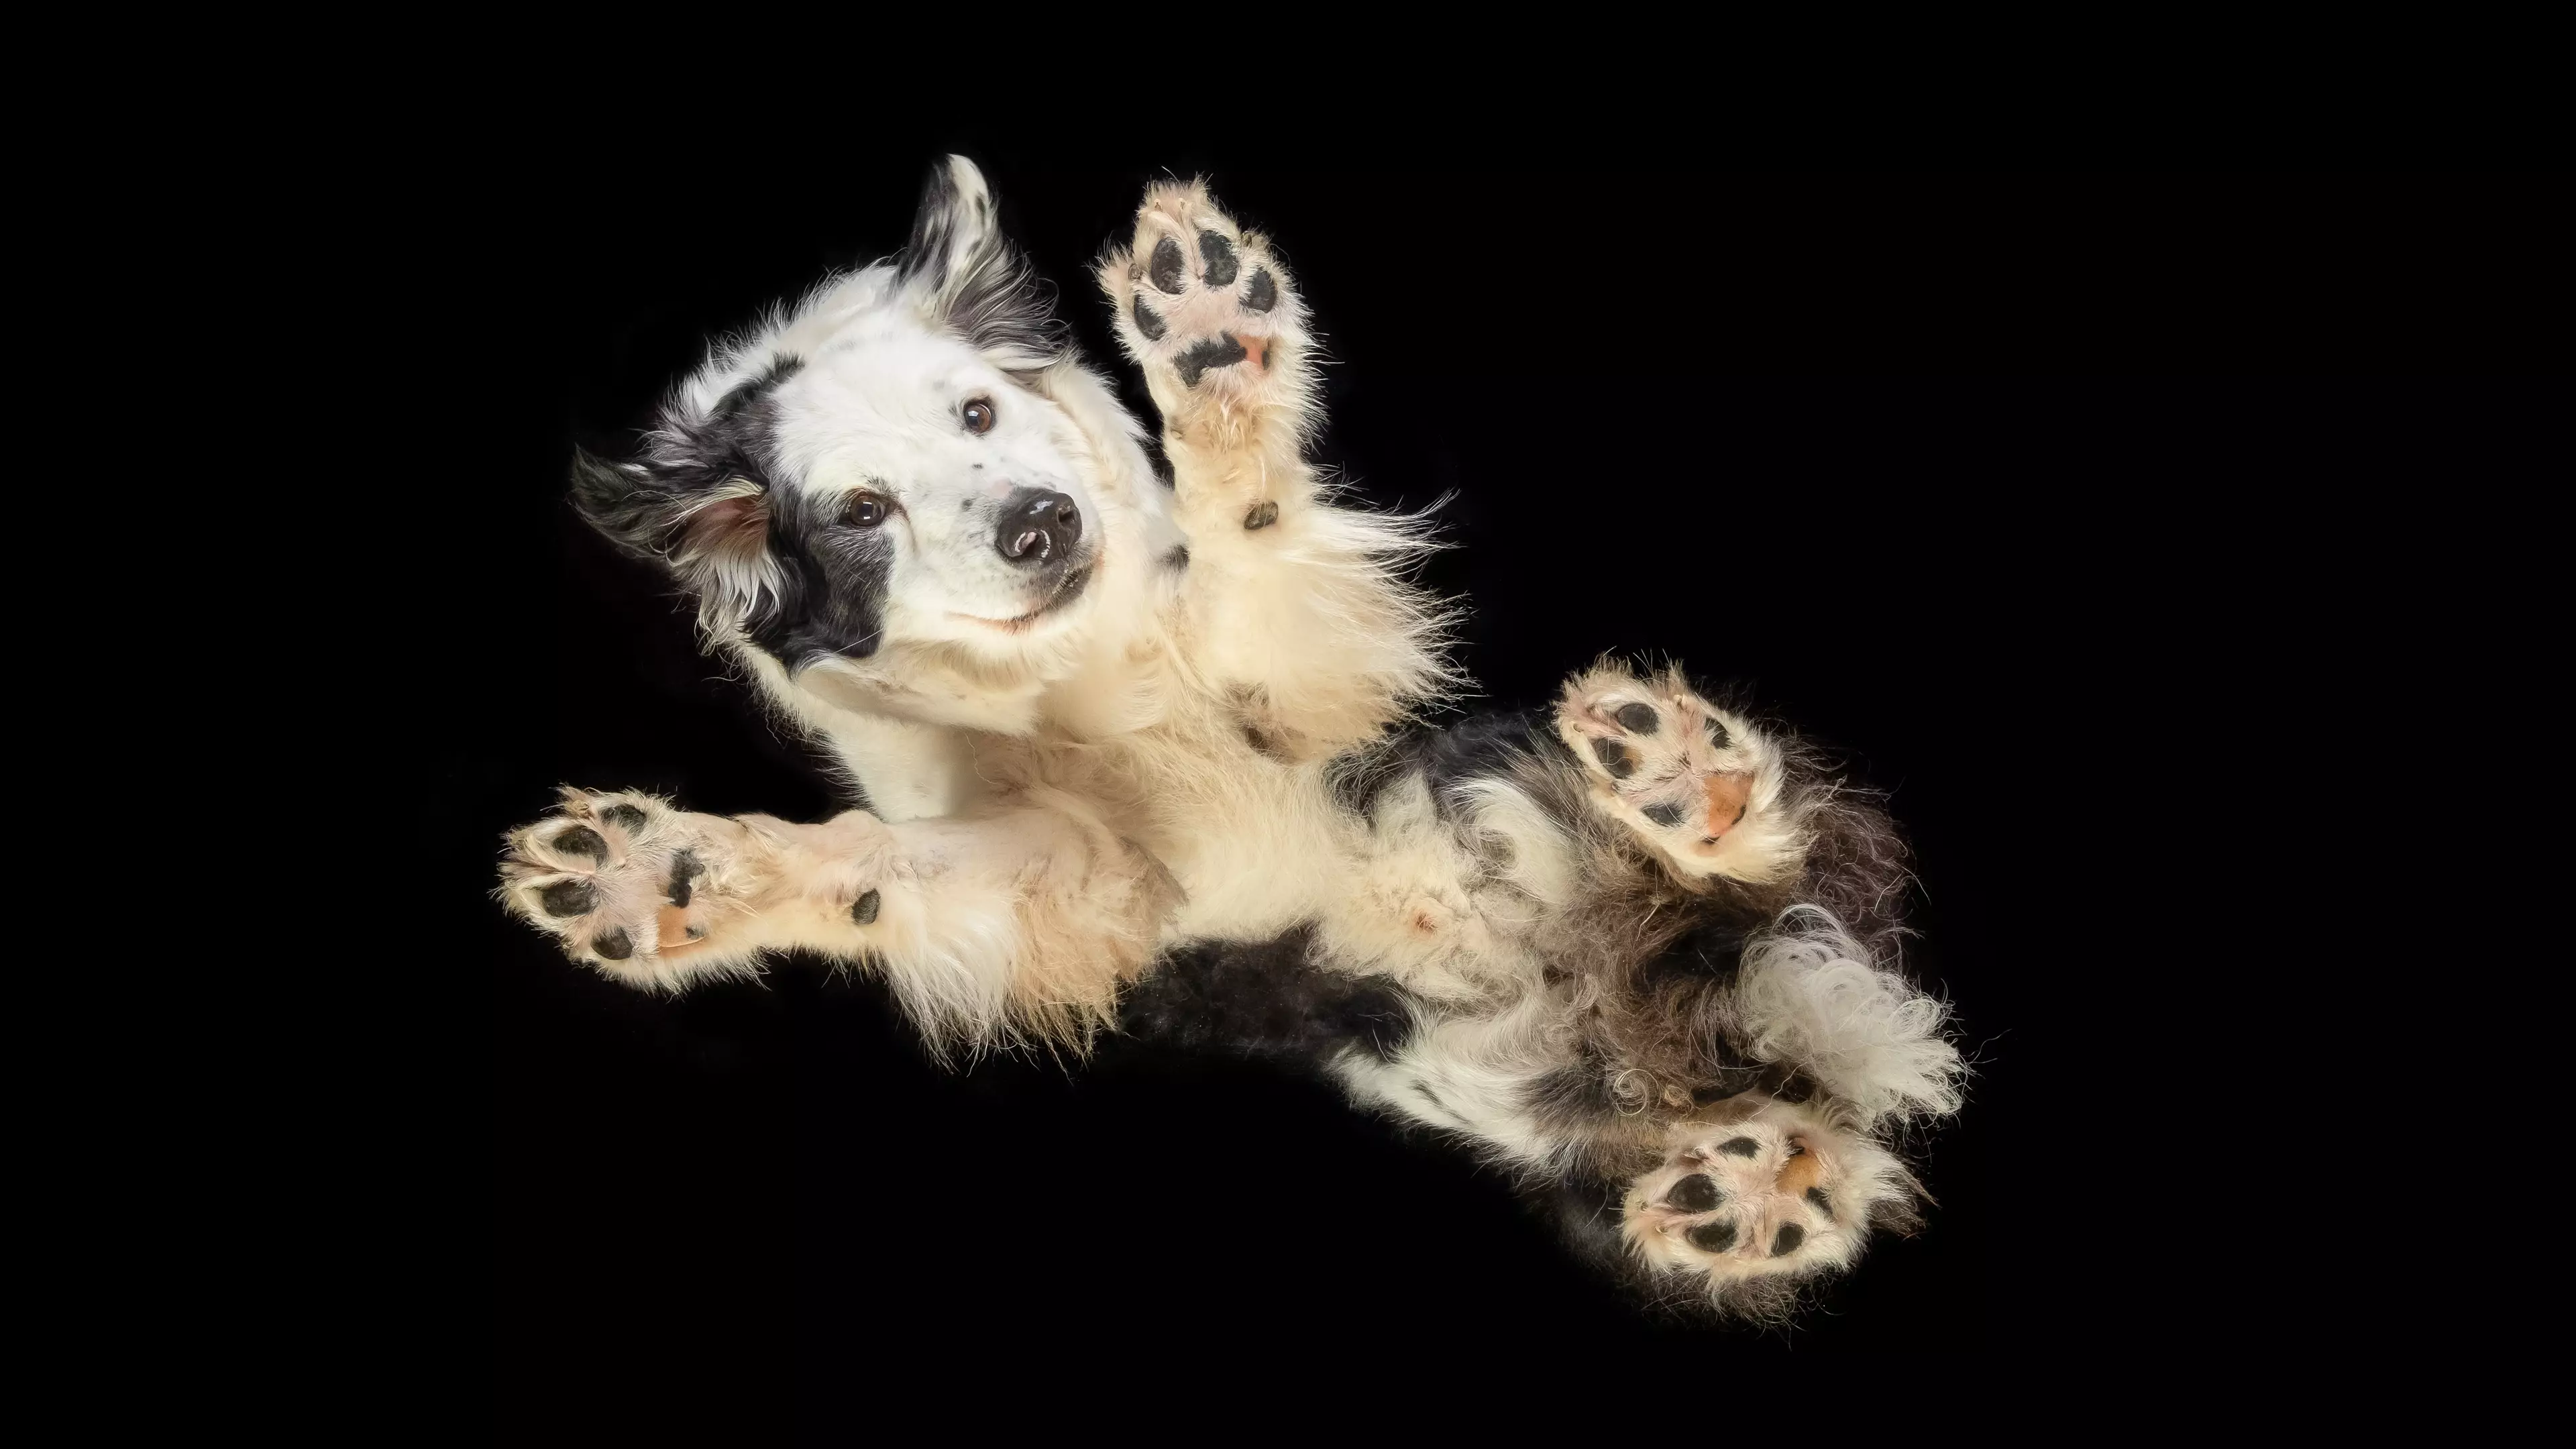 Pet Photographer Captures Dogs Flying Through The Air 